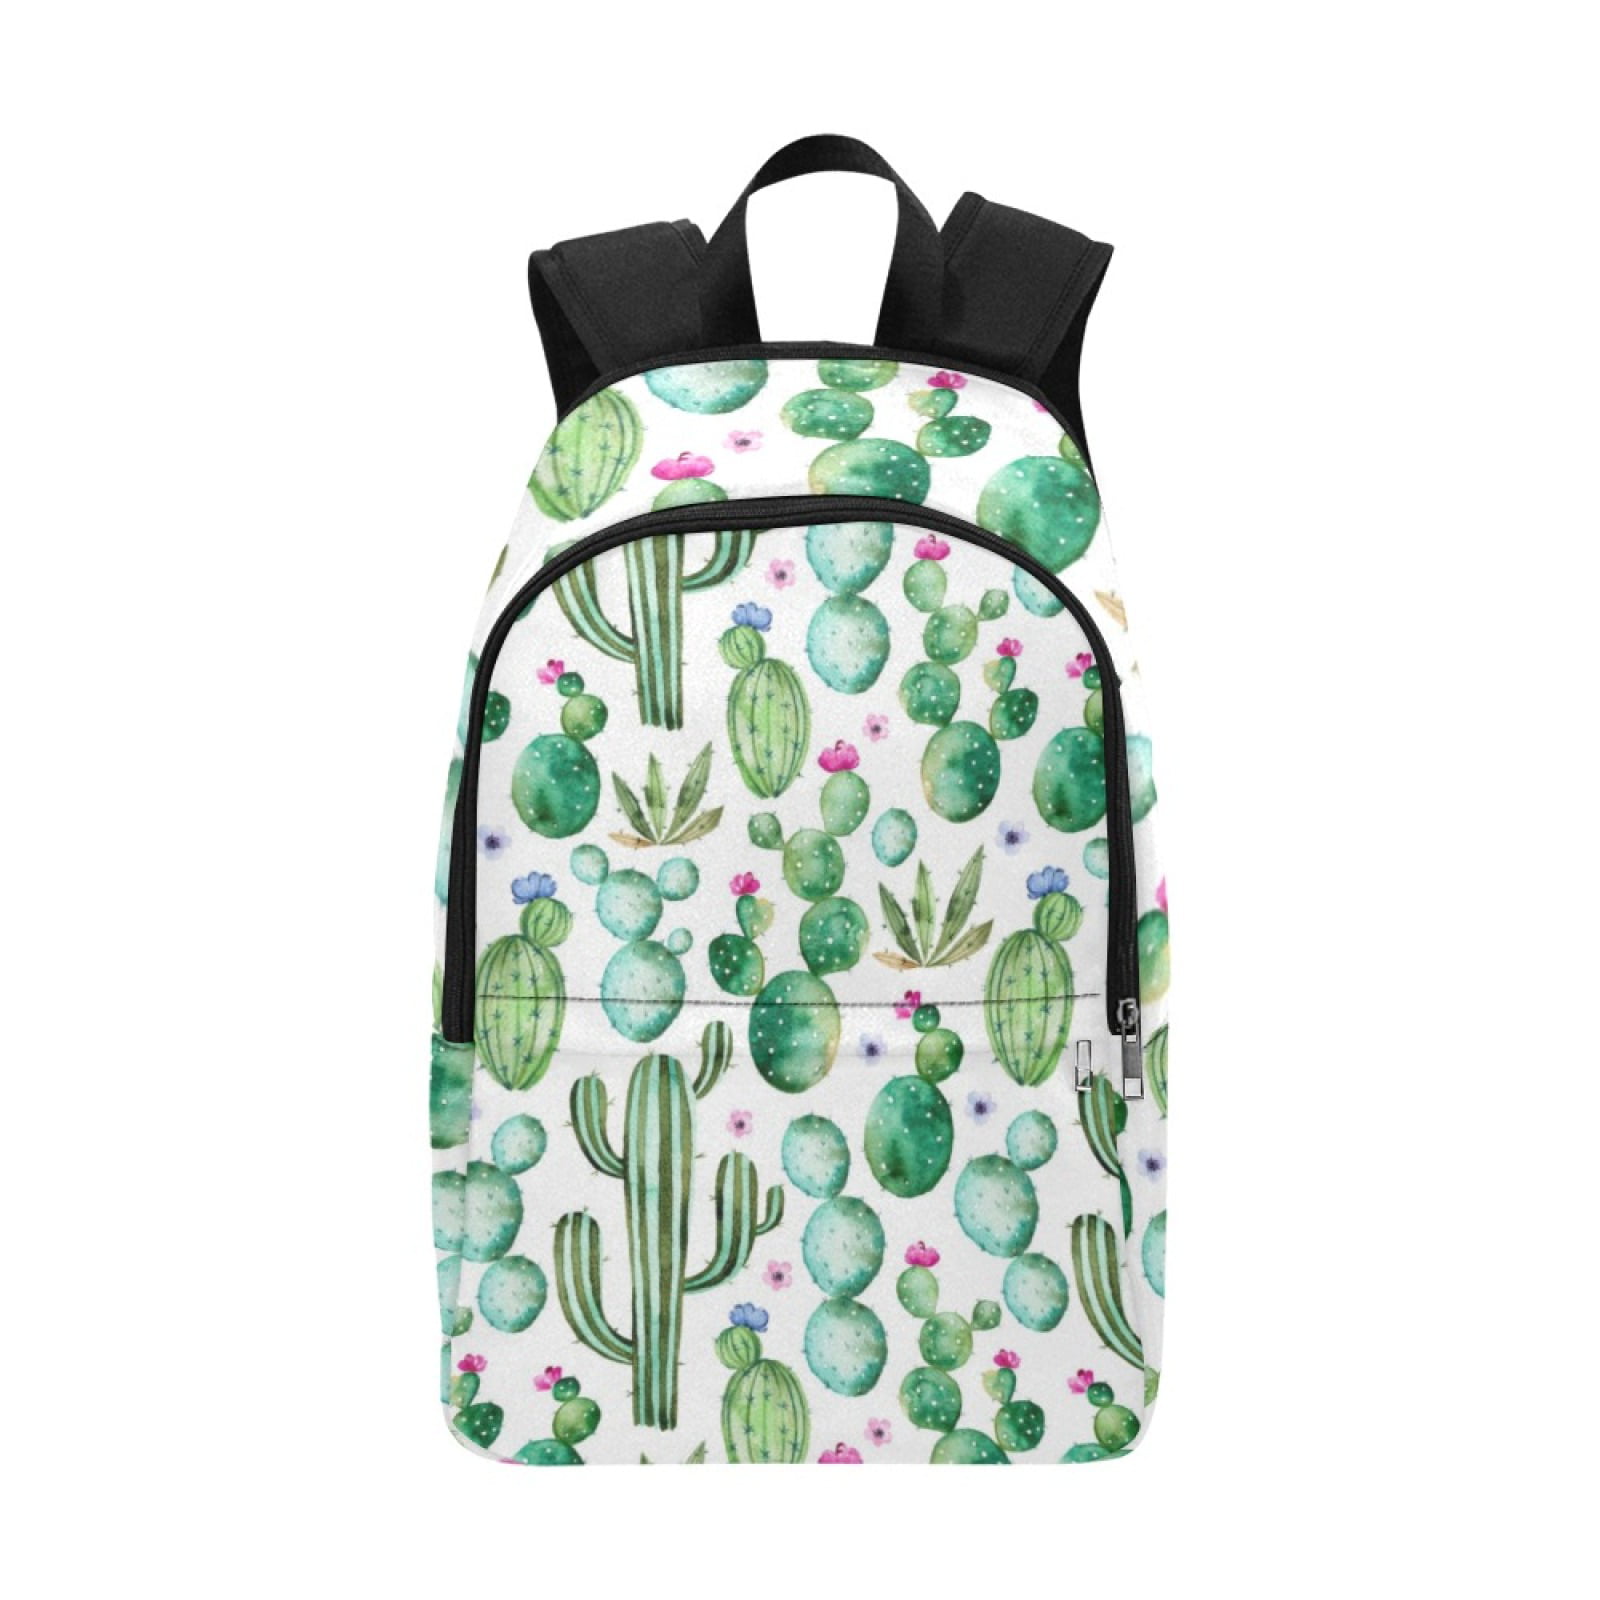 Leather Cactus Potted Plant Green Backpack Daypack Bag Women 